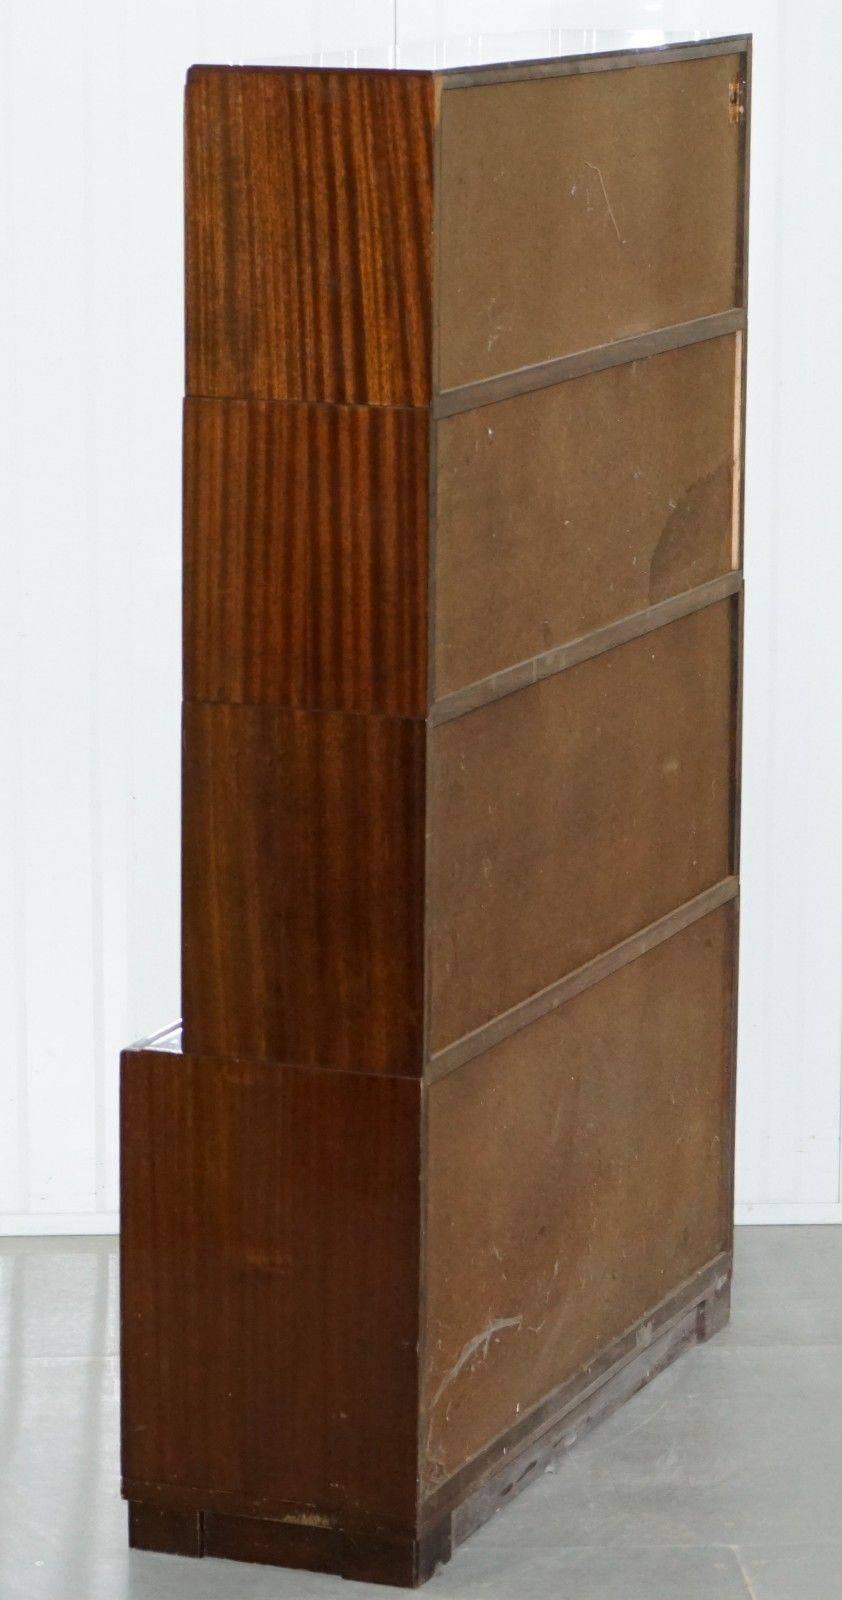 Hand-Crafted 1950s Mahogany Modular Minty Oxford Vintage Stacking Legal Bookcase Glass Doors